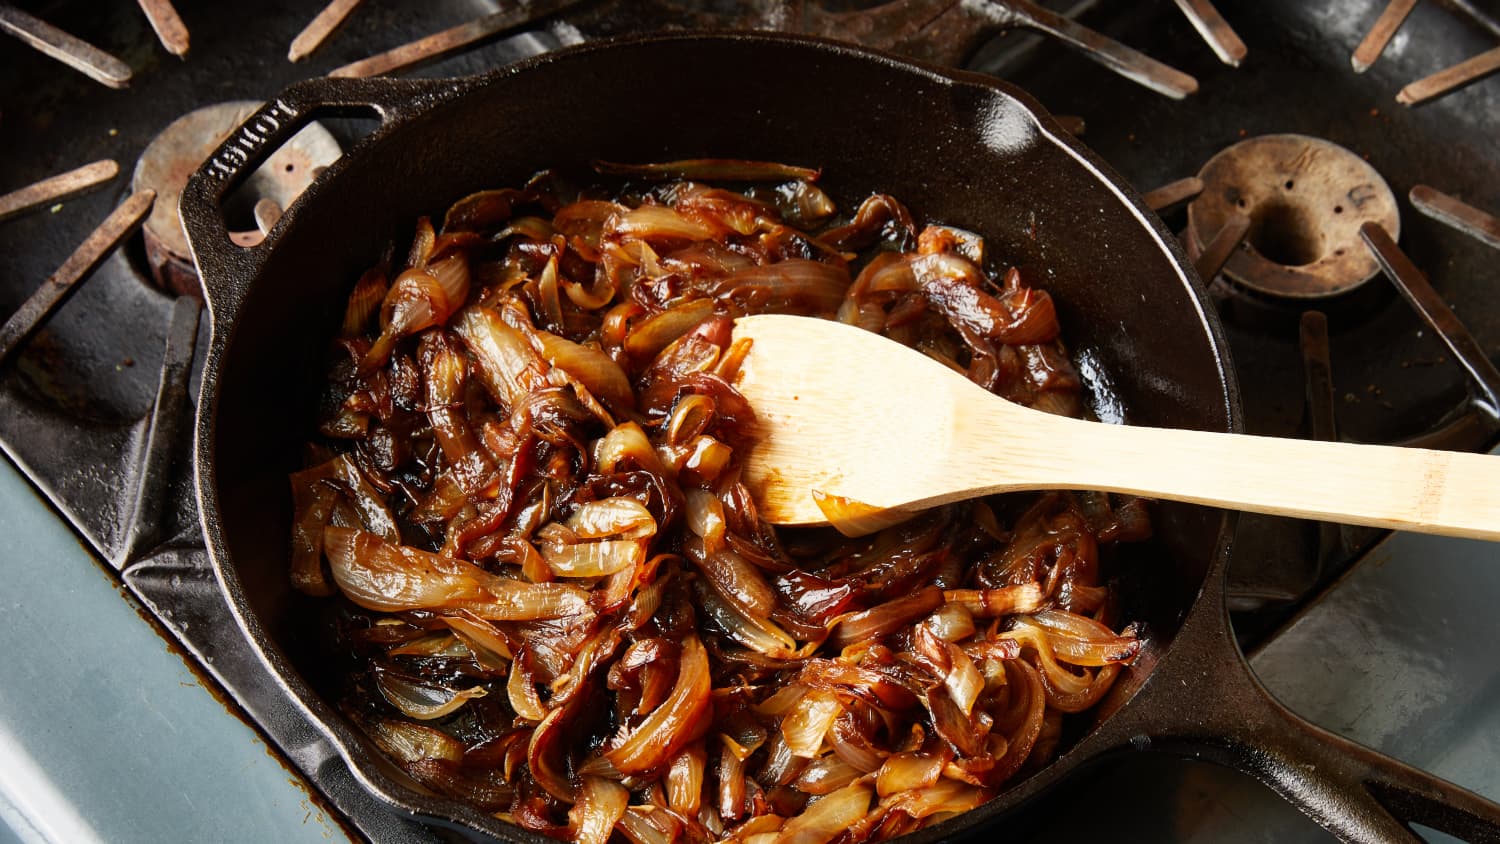 Why Aromatic Foods Are Best Left Out Of The Cast Iron Skillet